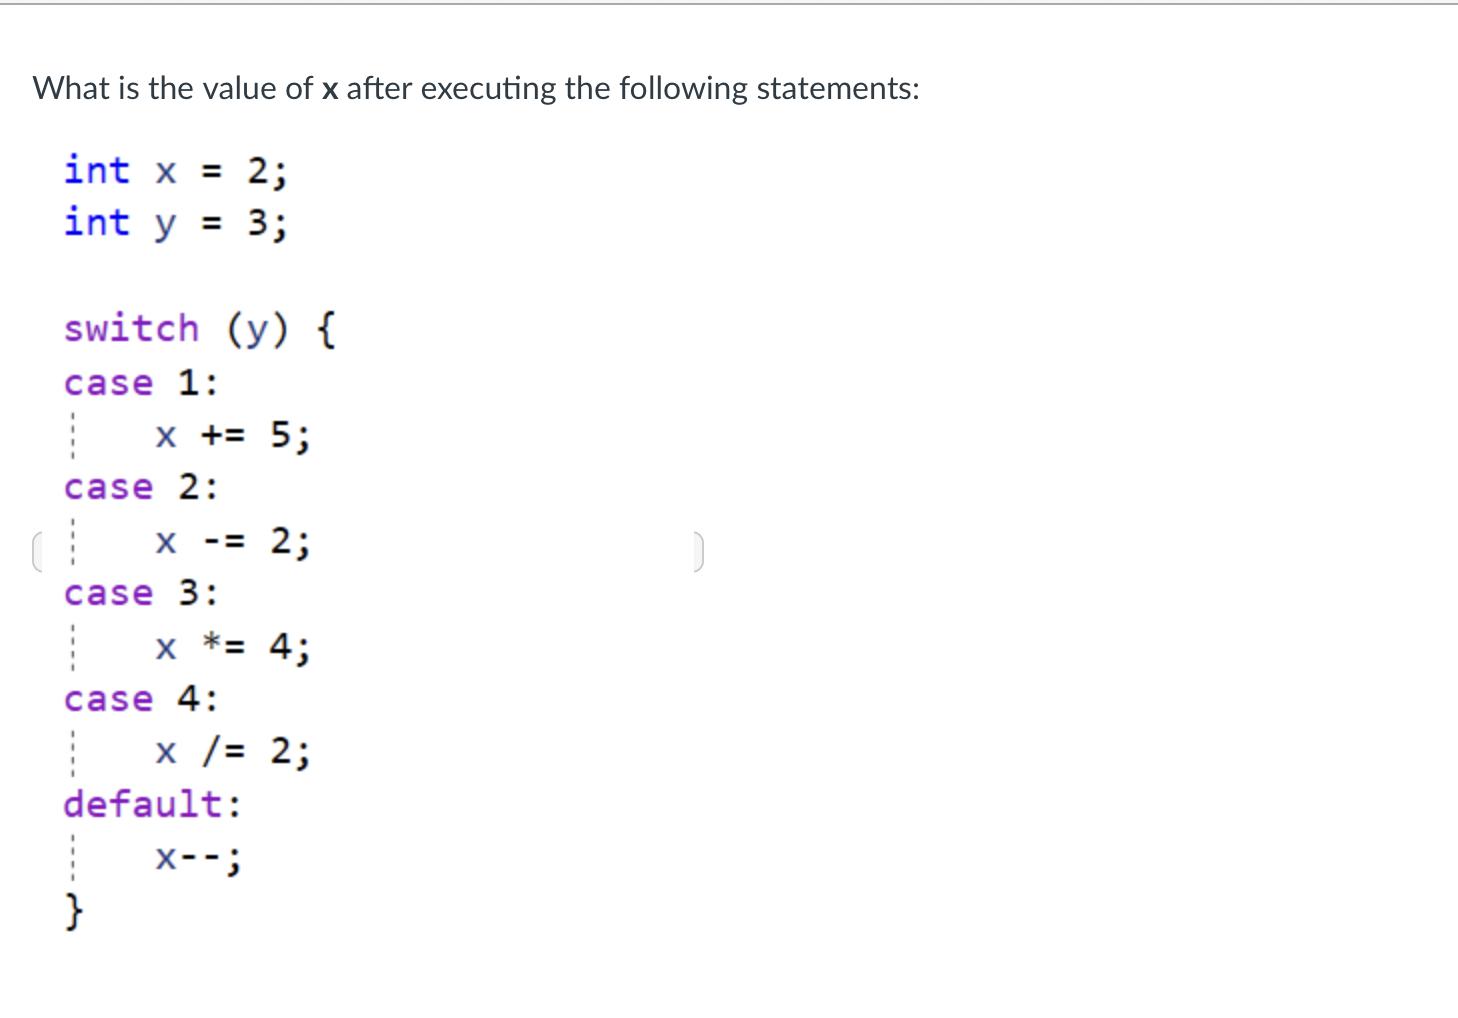 What is the value of x after executing the following statements: int x = 2; int y = 3; switch (y) { case 1: x